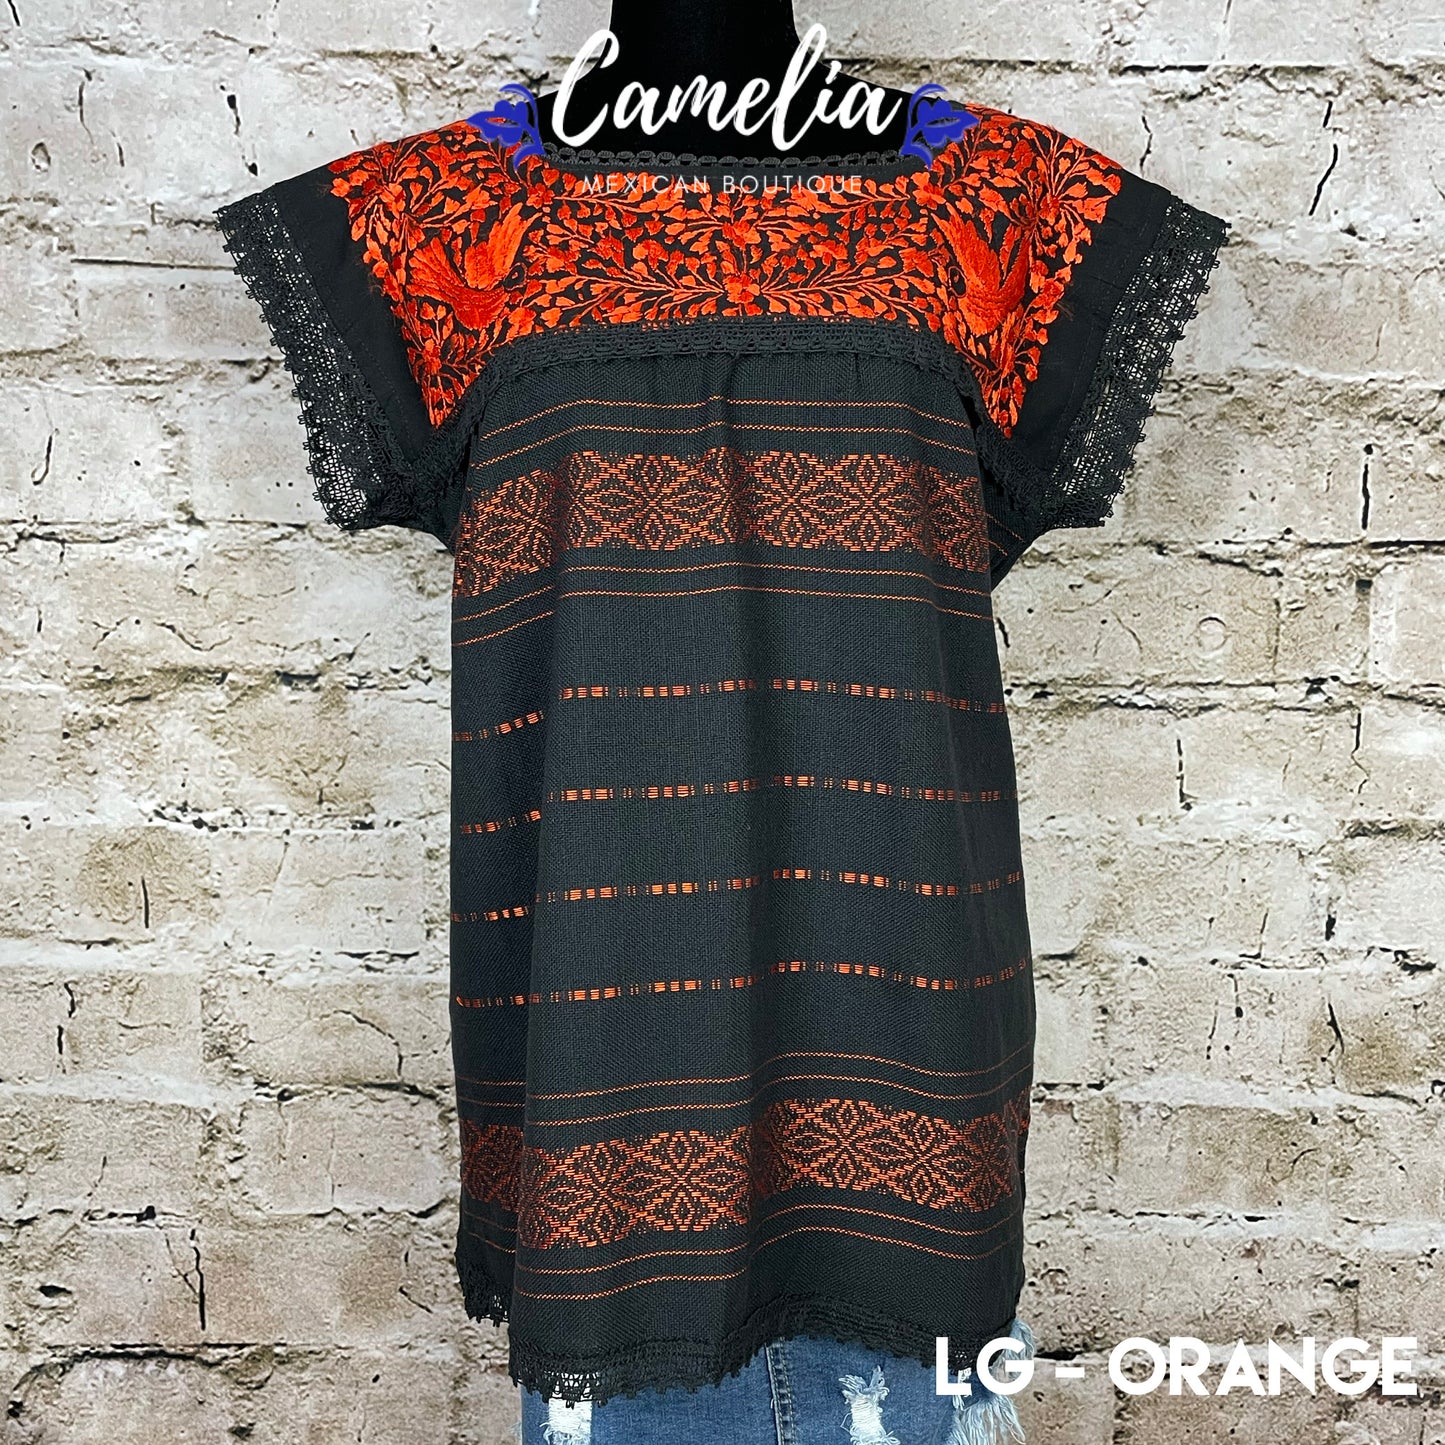 Paloma Loomed Mexican Blouse - 2 Tone